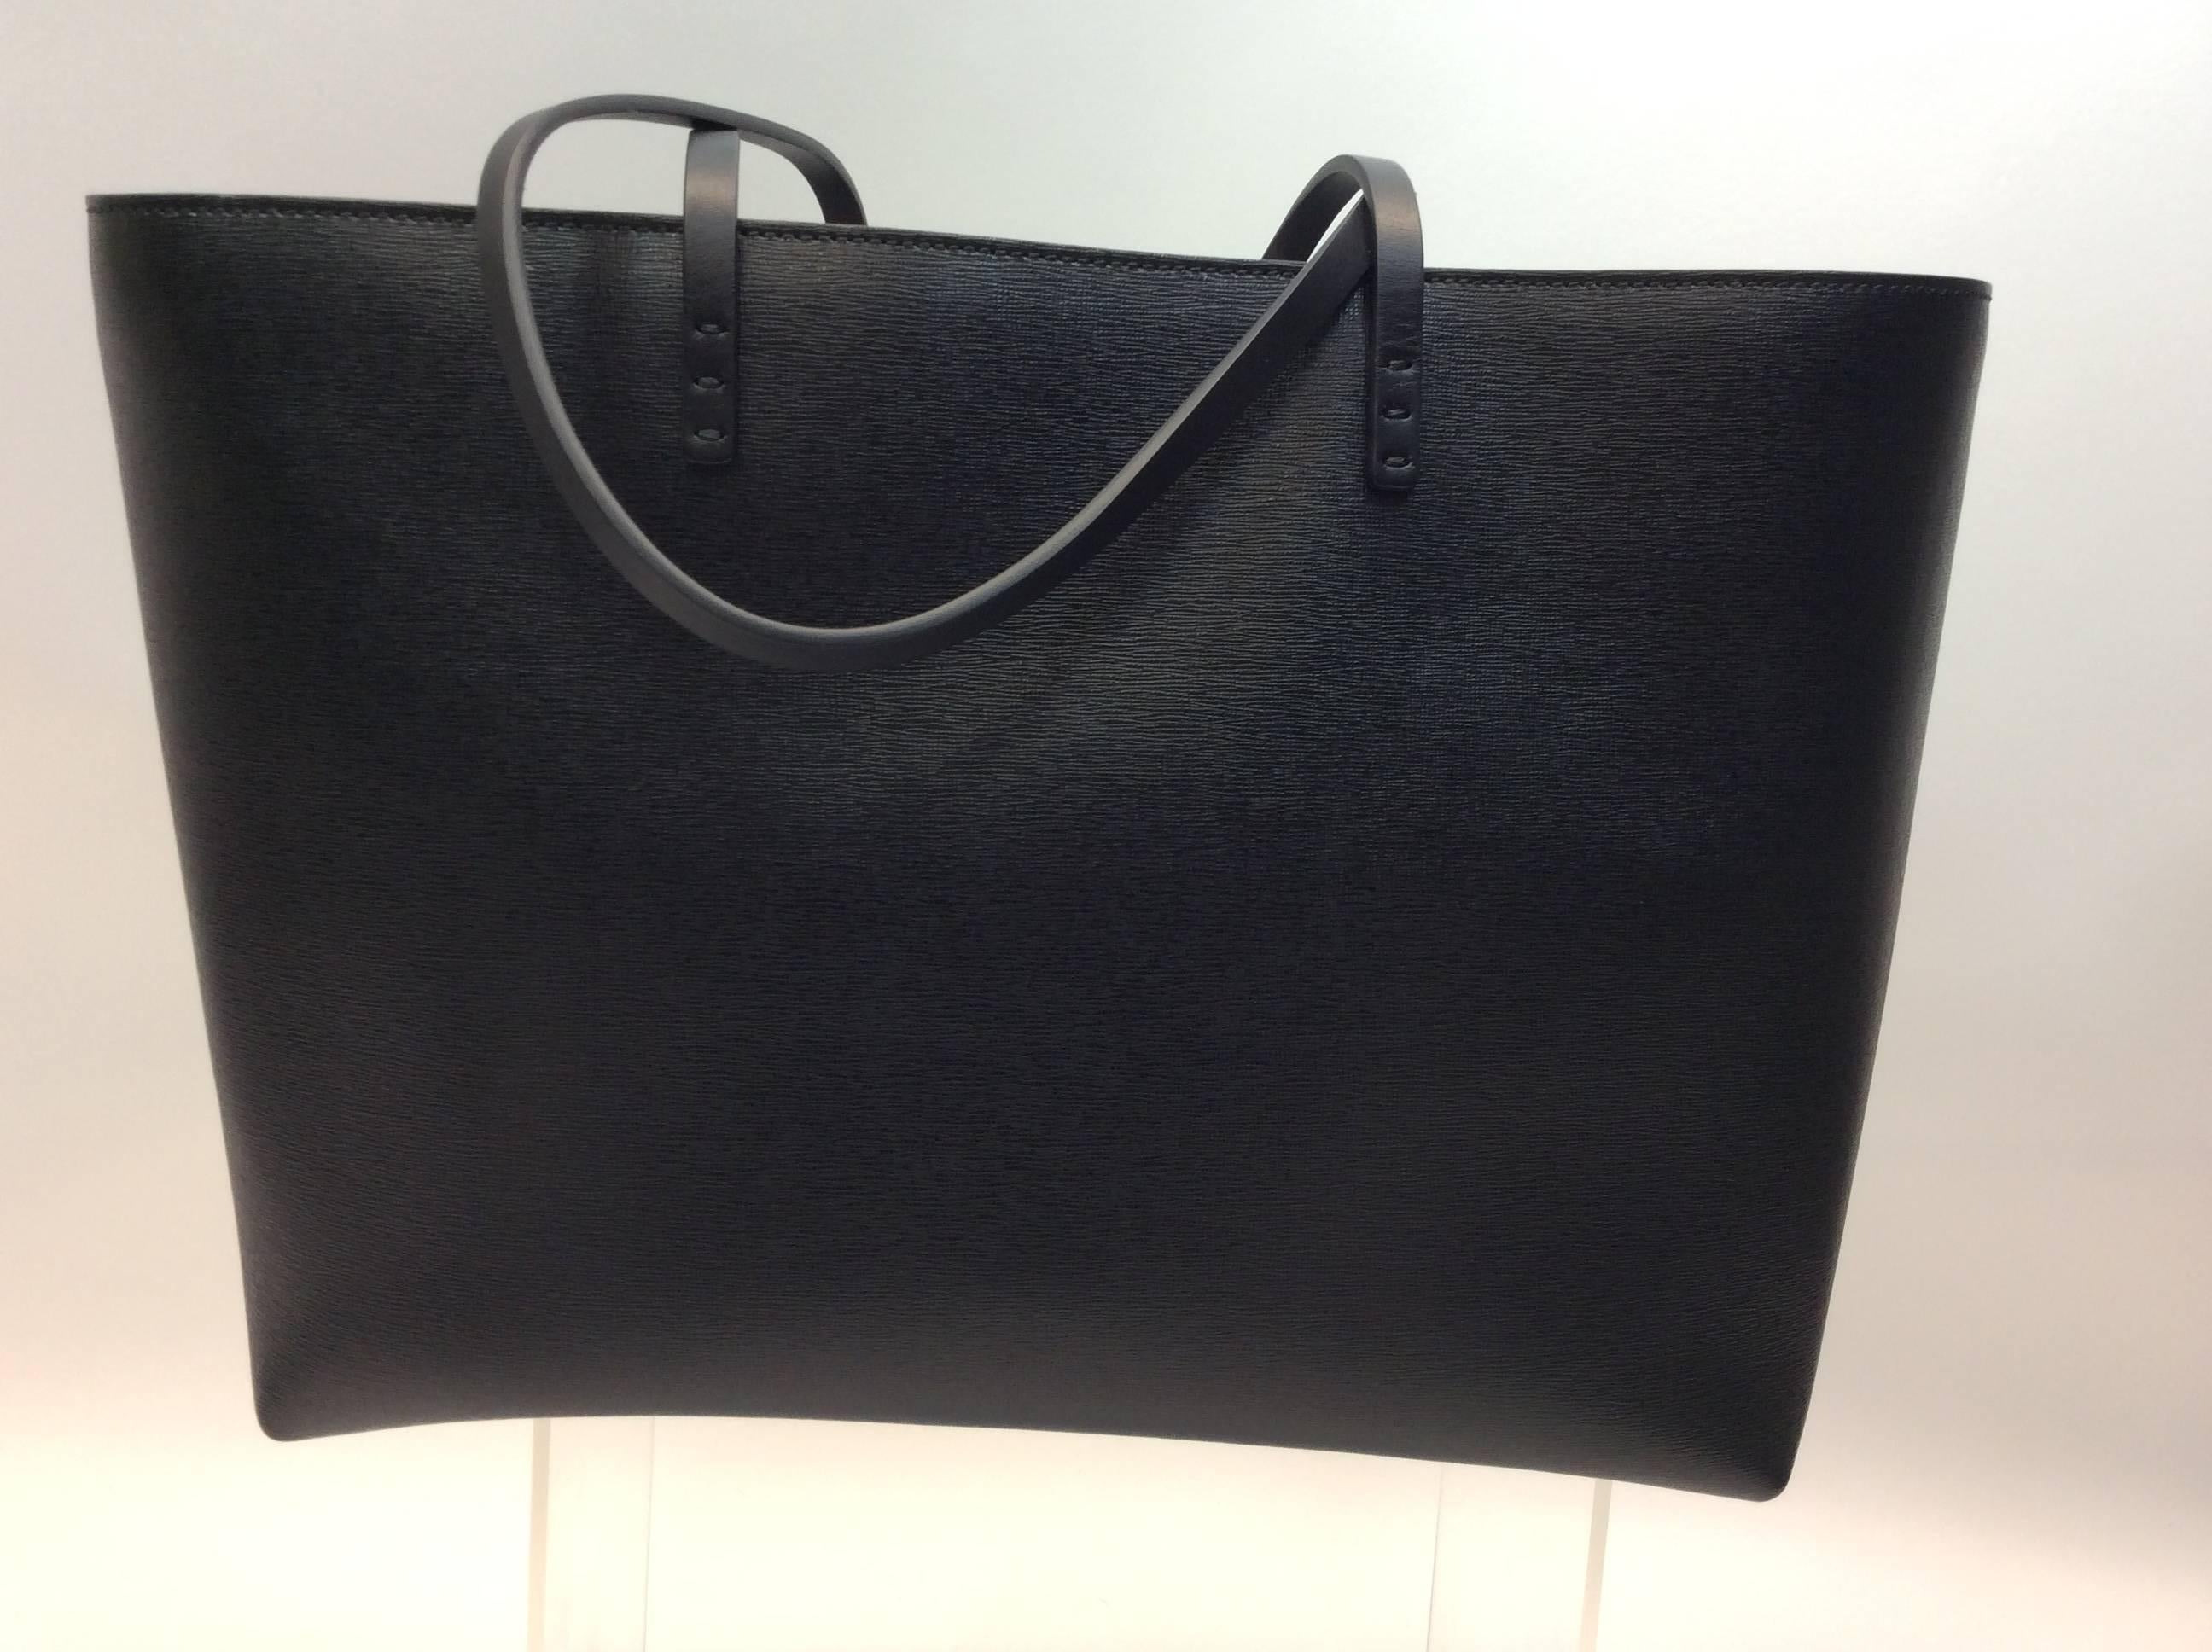 Fendi Black and Blue Eye Tote In Excellent Condition For Sale In Narberth, PA